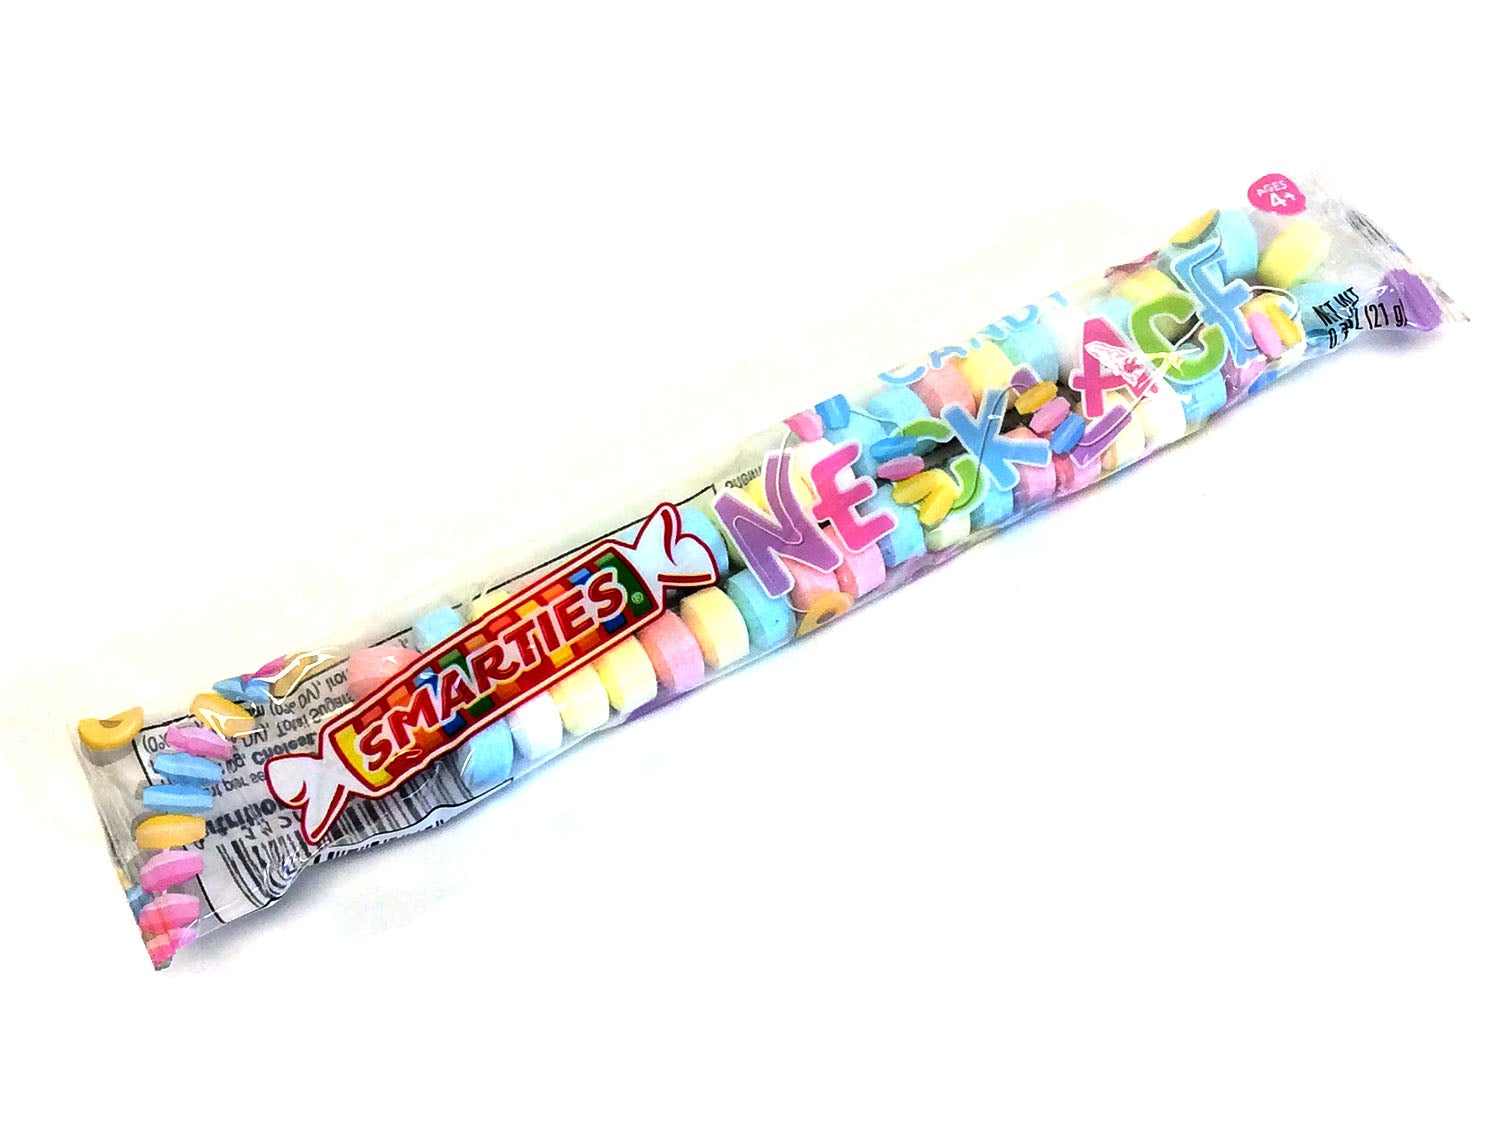 Smarties Candy Necklace - 0.74 oz